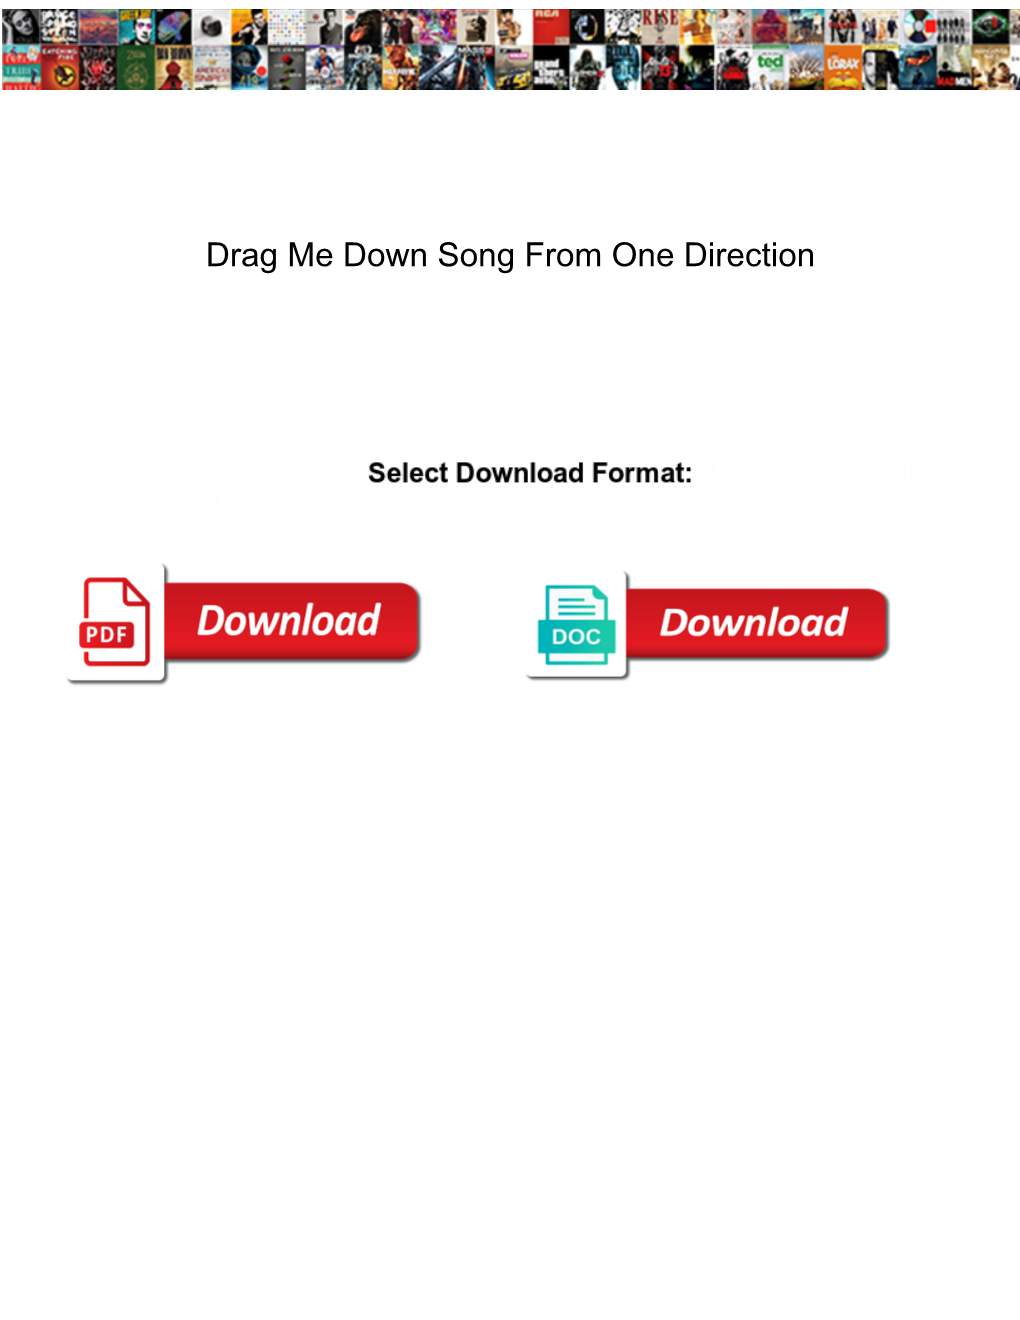 Drag Me Down Song from One Direction